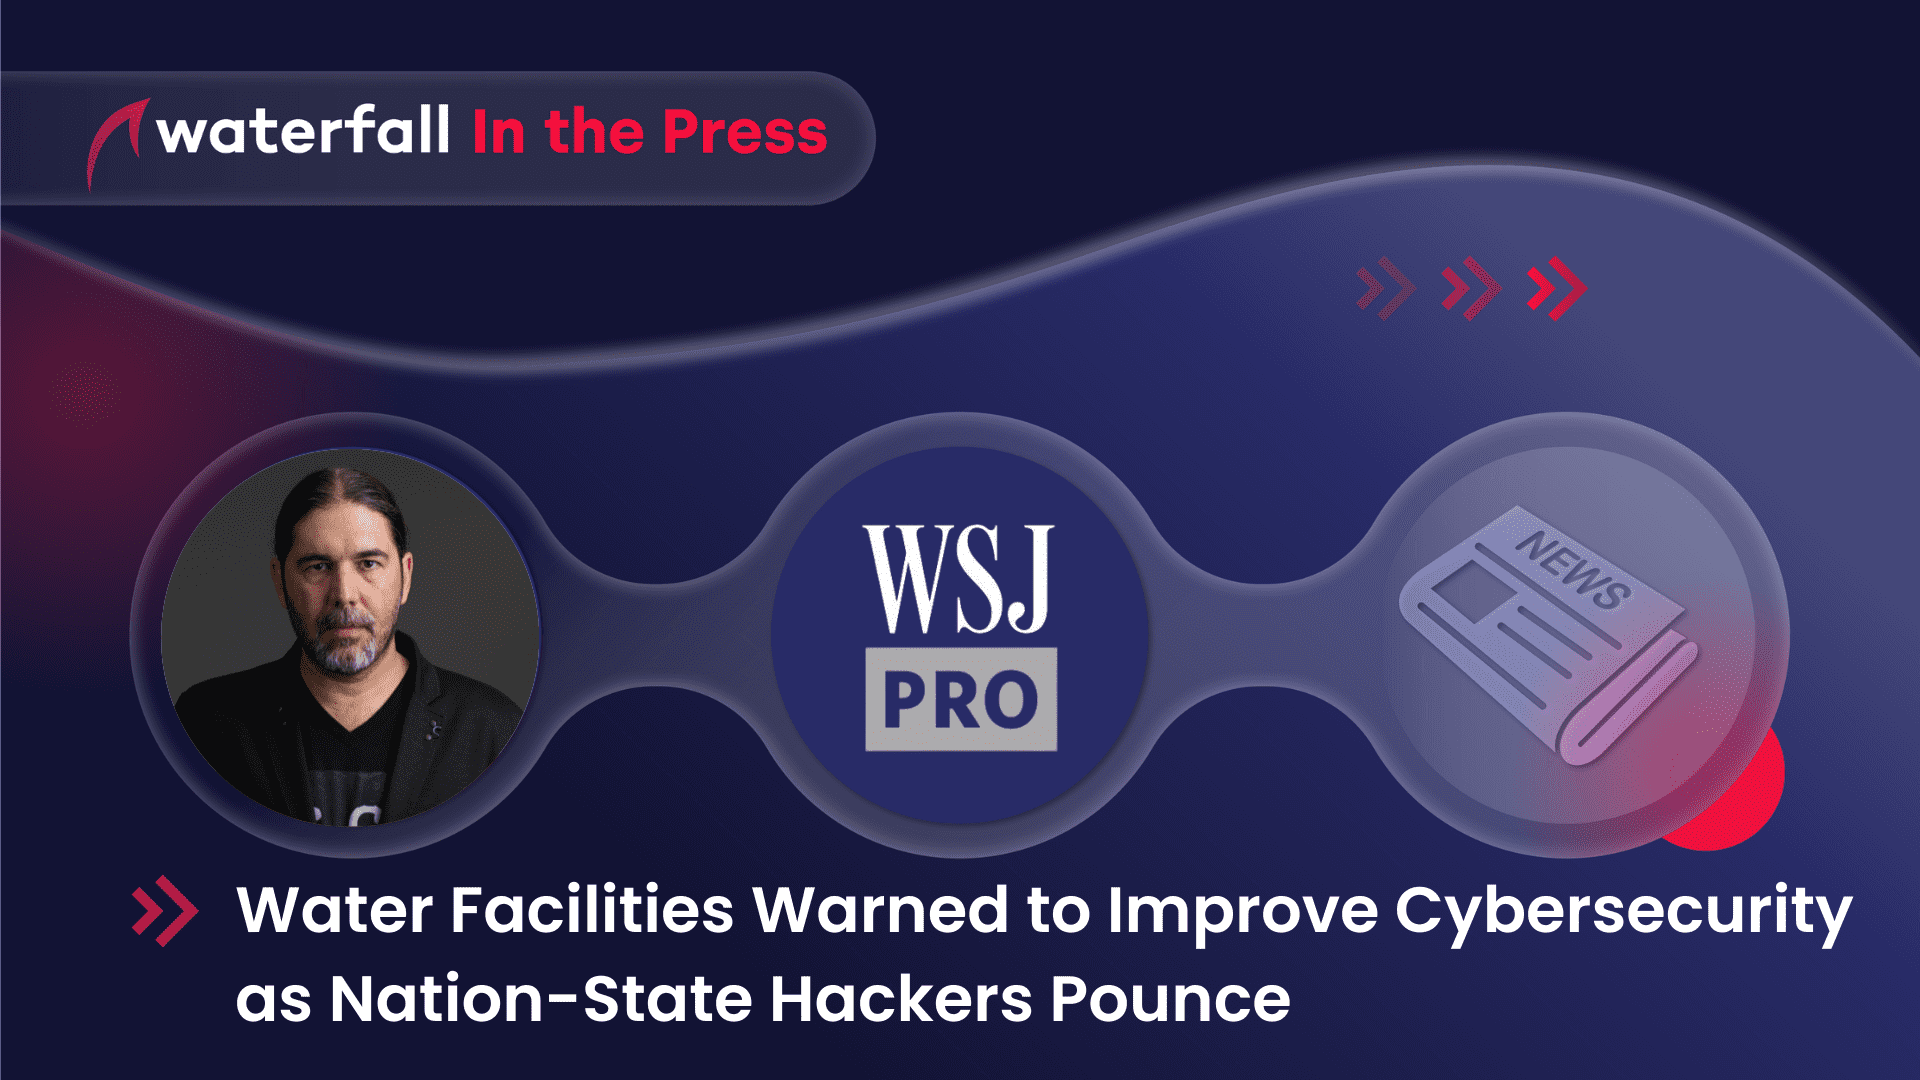 Water Facilities Warned to Improve Cybersecurity as Nation-State Hackers Pounce